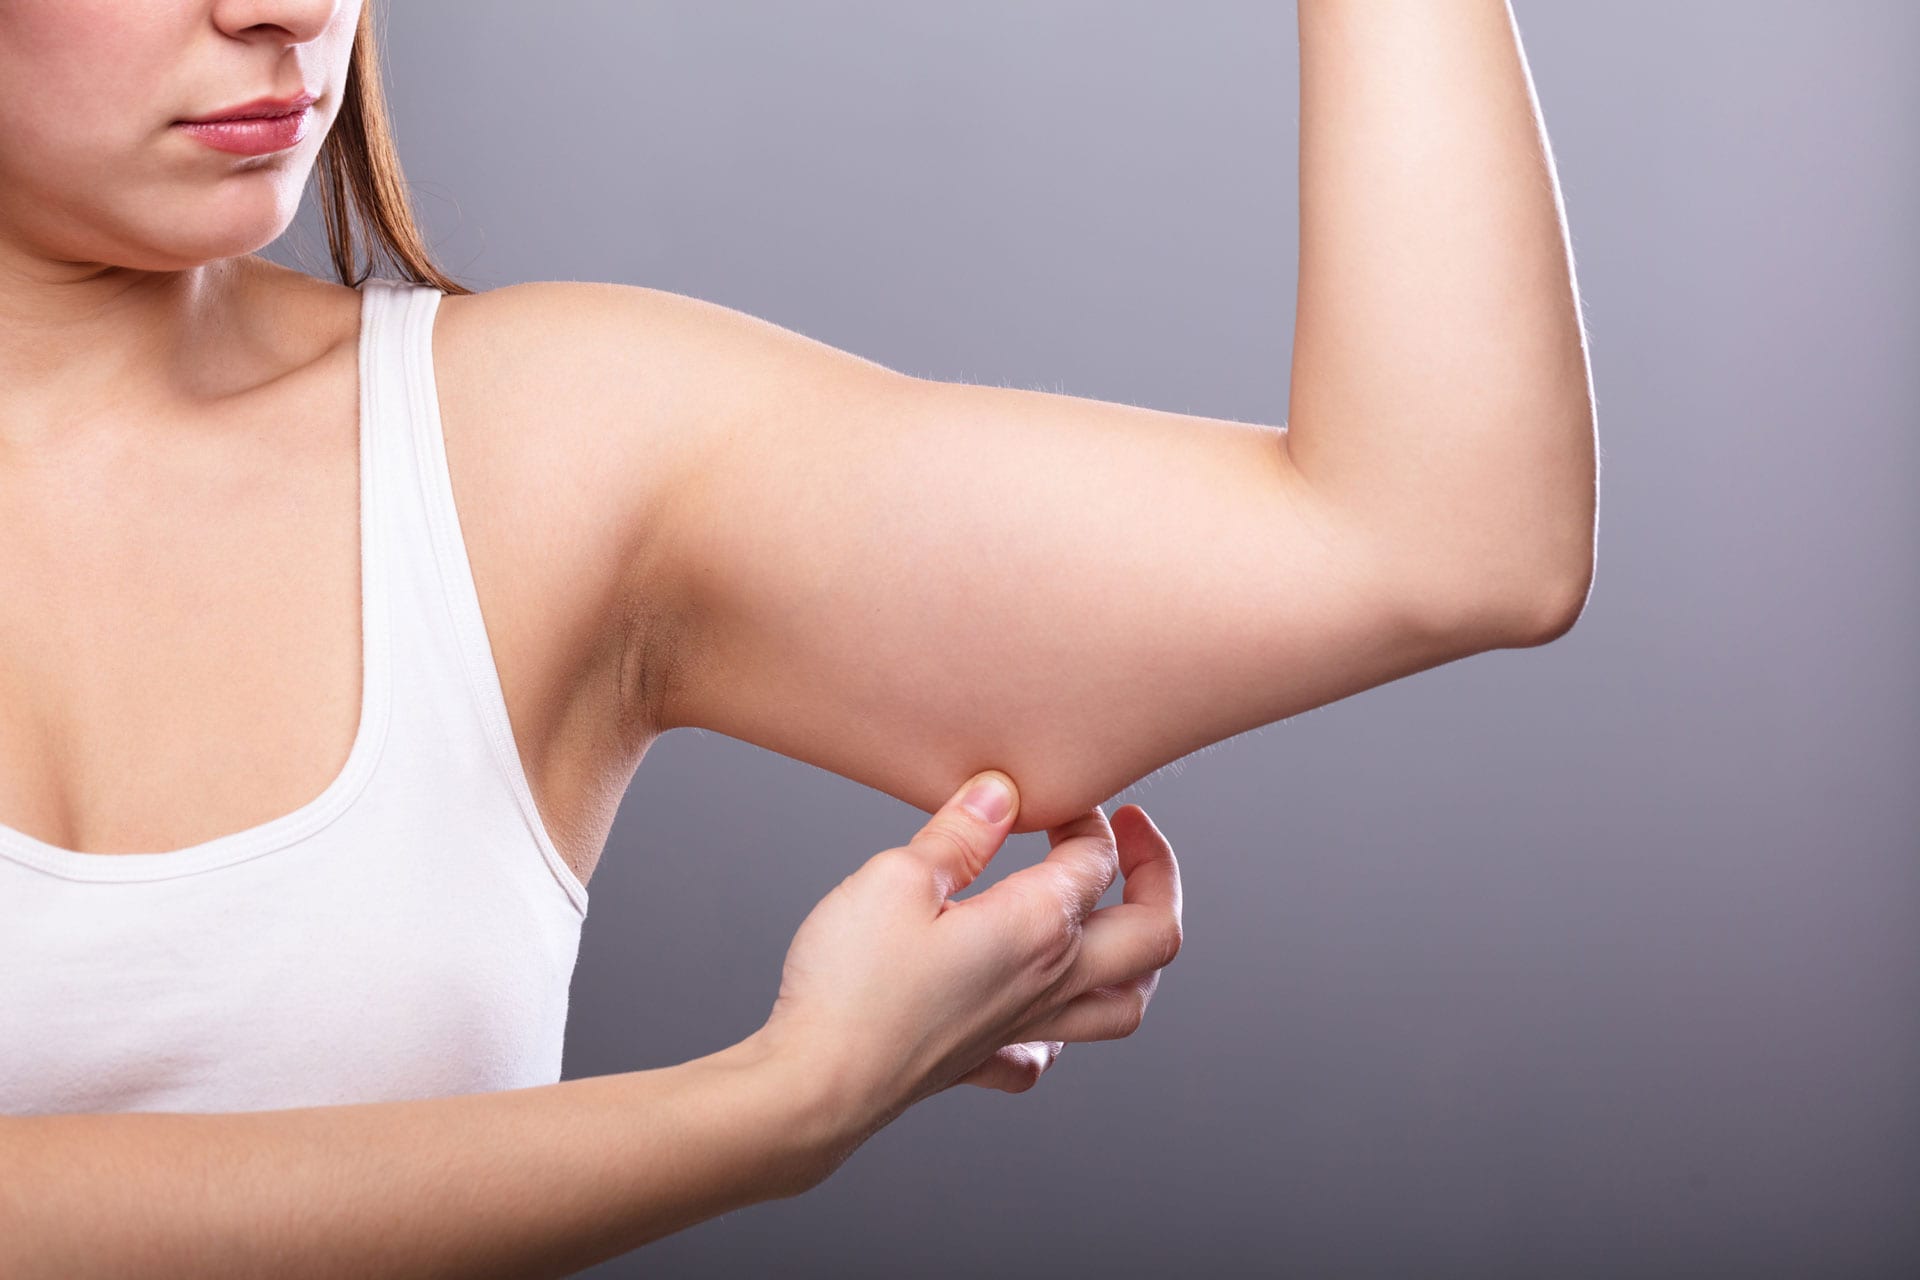 close-up-of-a-woman-holding-arm-with-excess-fat-and-needing-coolsculpting